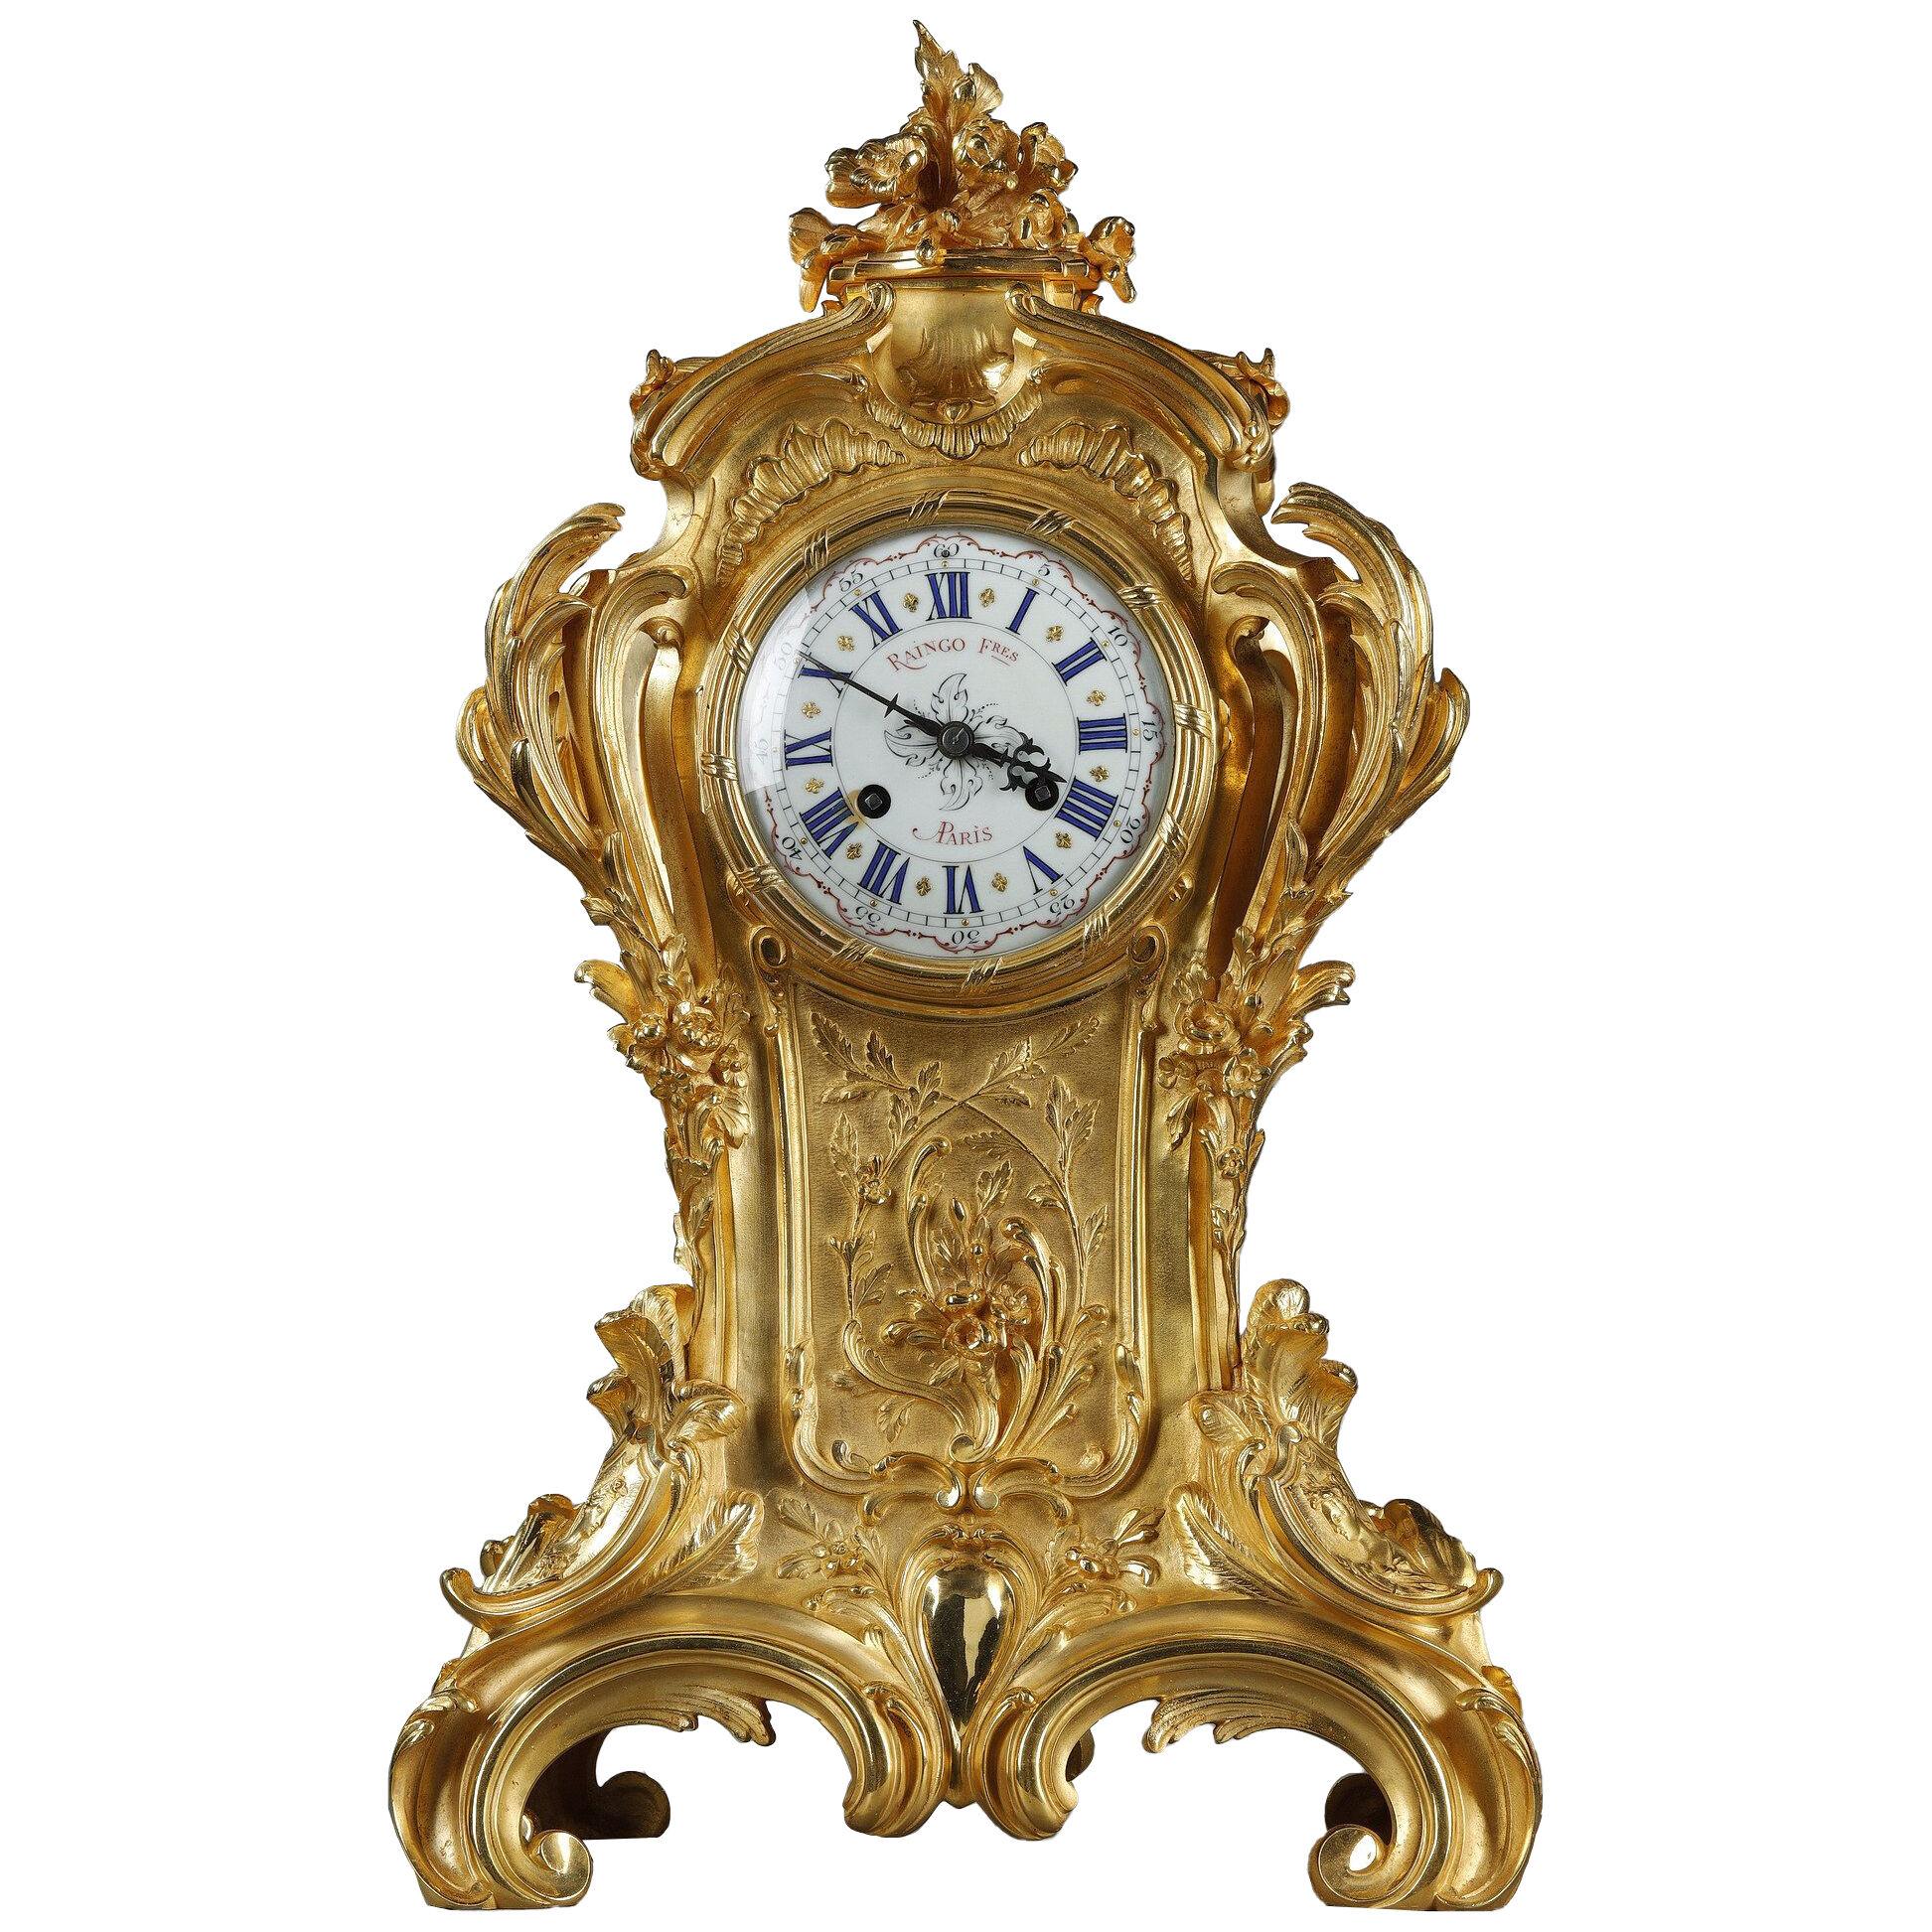 Ormulu and chased bronze rocaille clock, Raingo frères